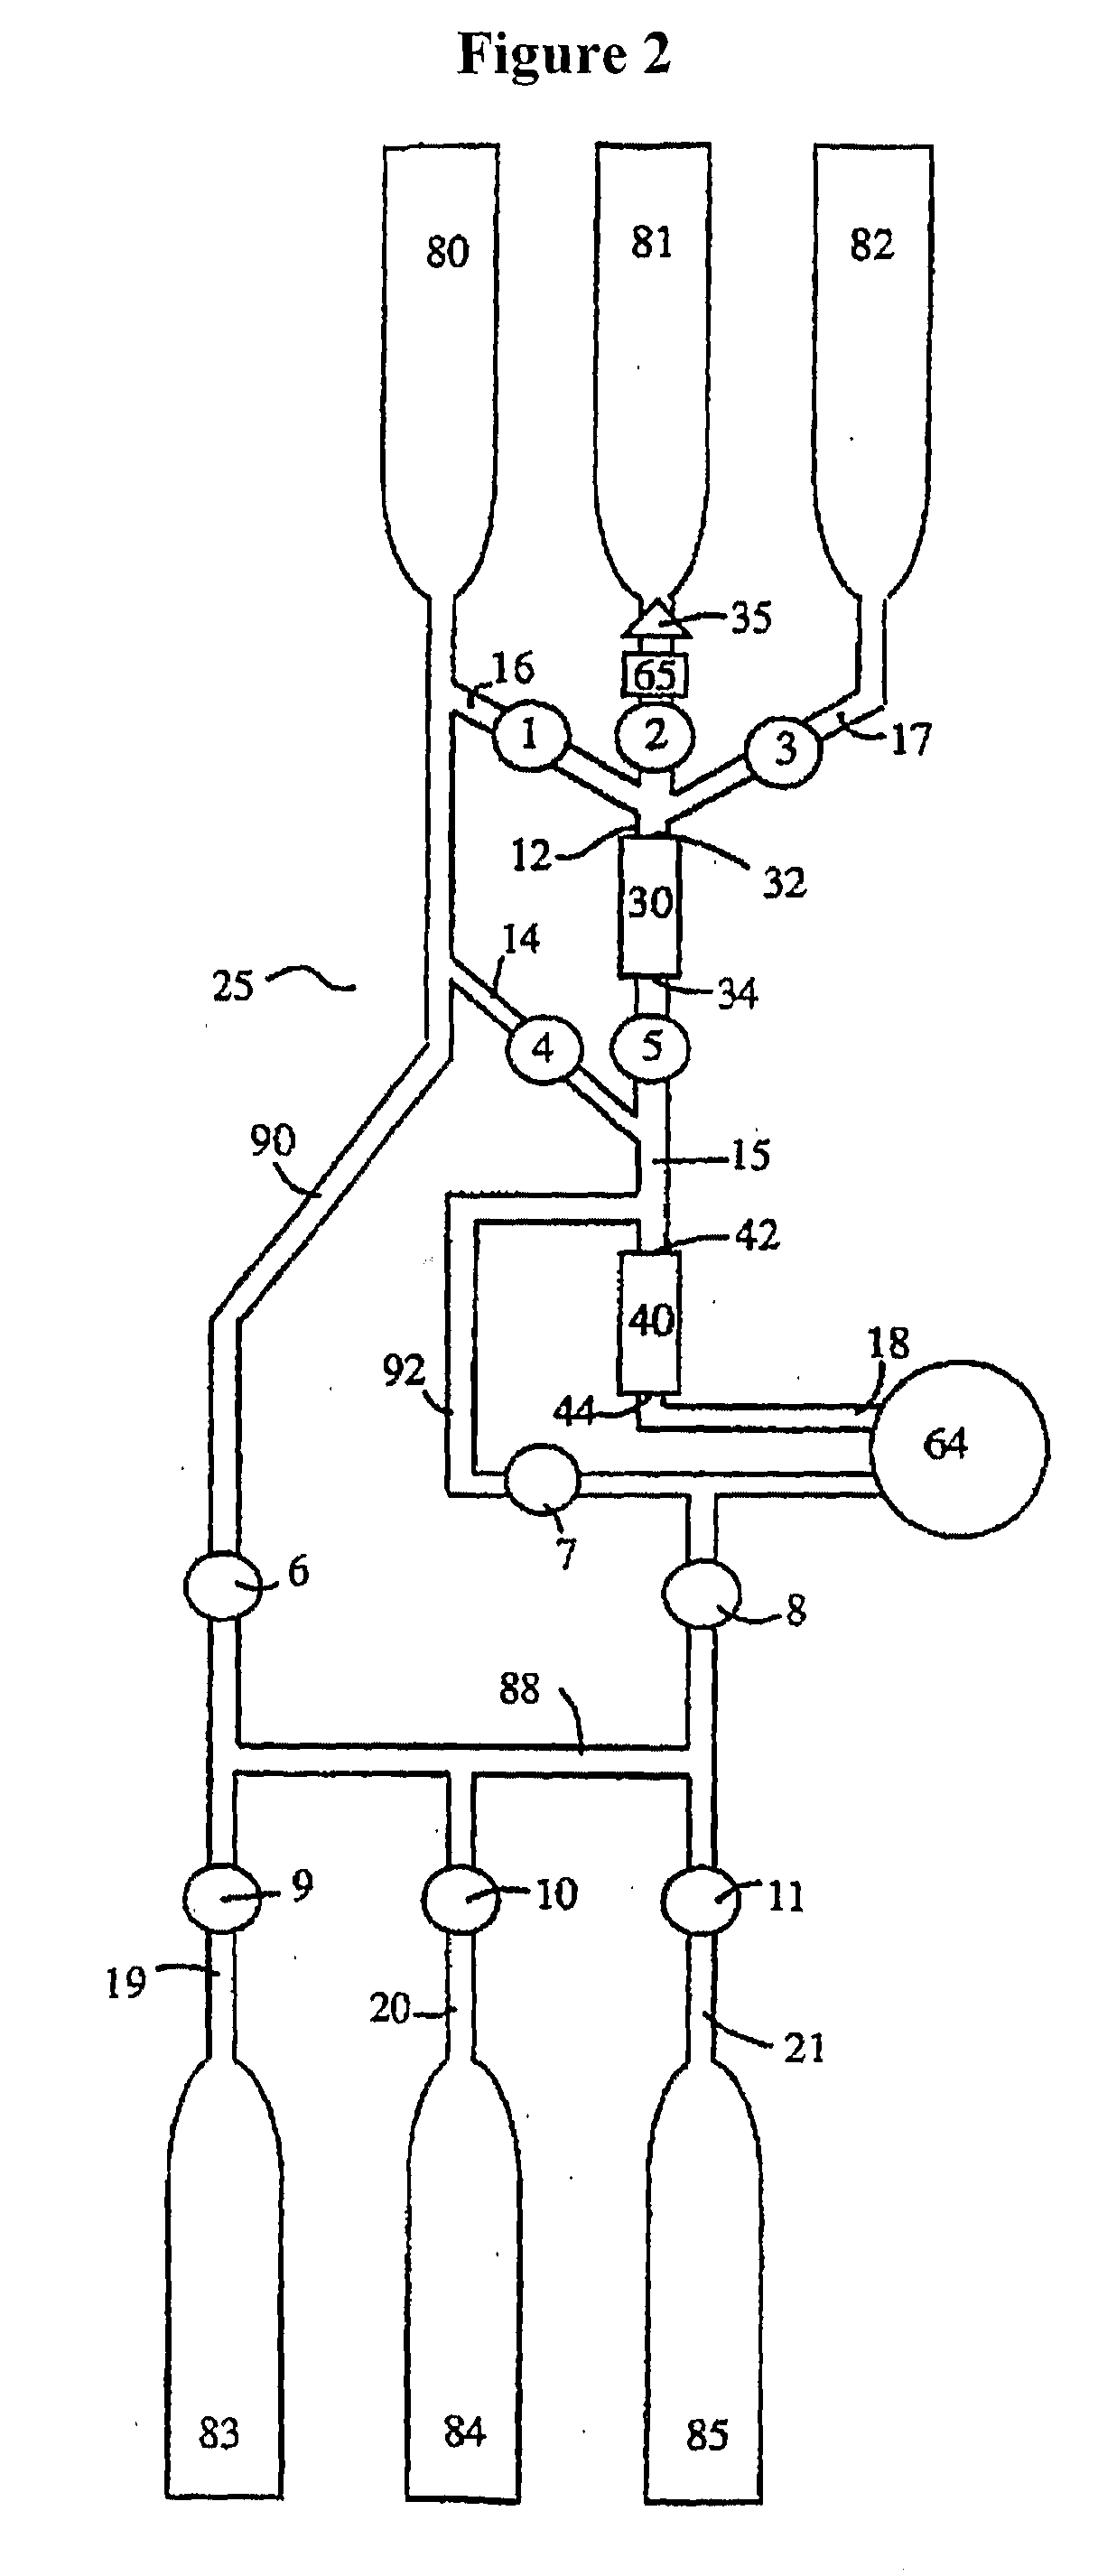 Sample Processing System and Methods